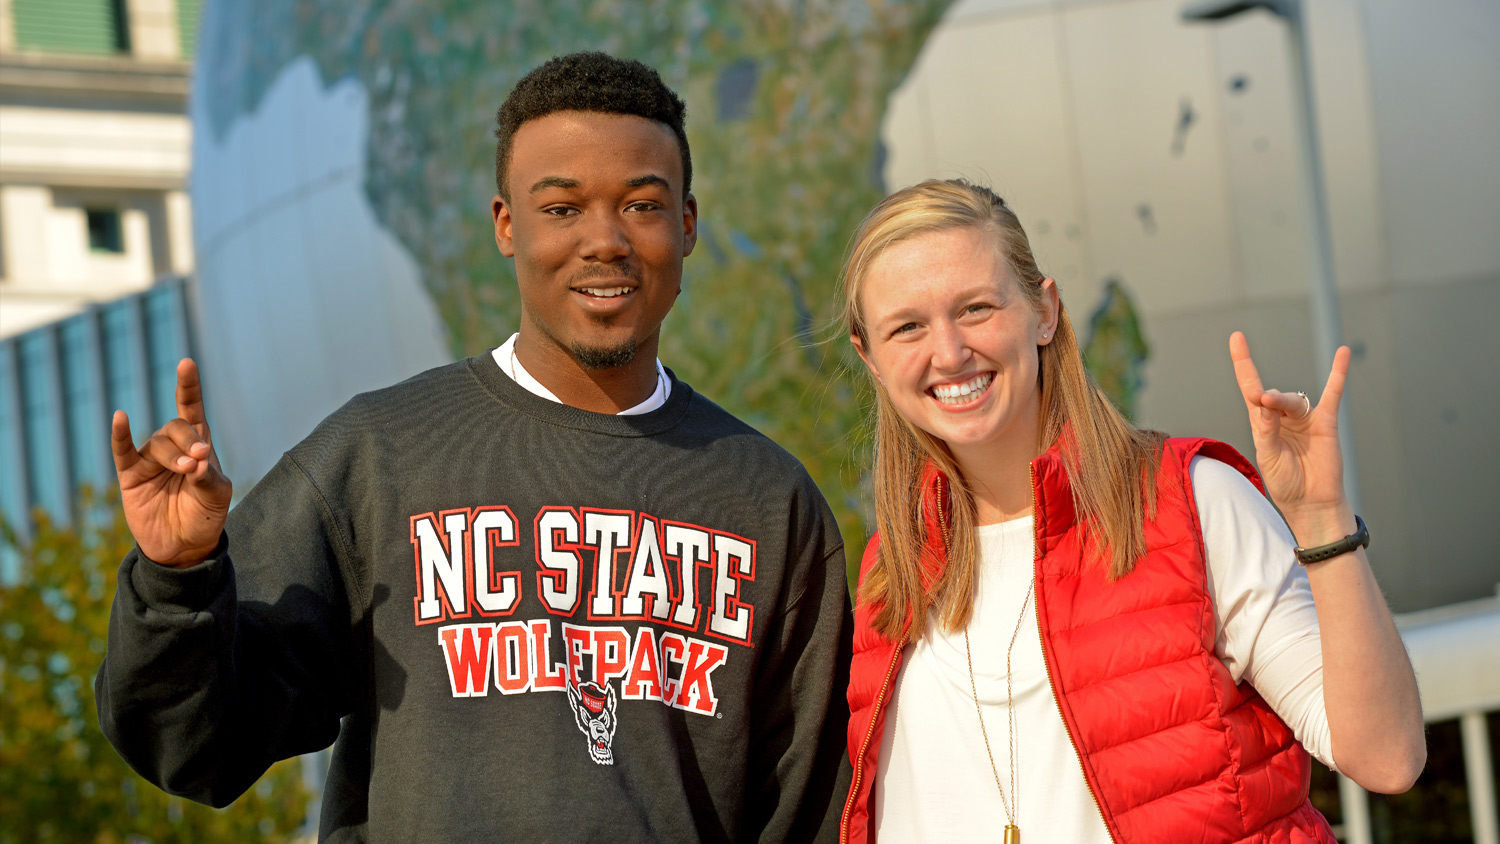 Wolfpack Pose - Undergraduate -Parks Recreation and Tourism Management NC State